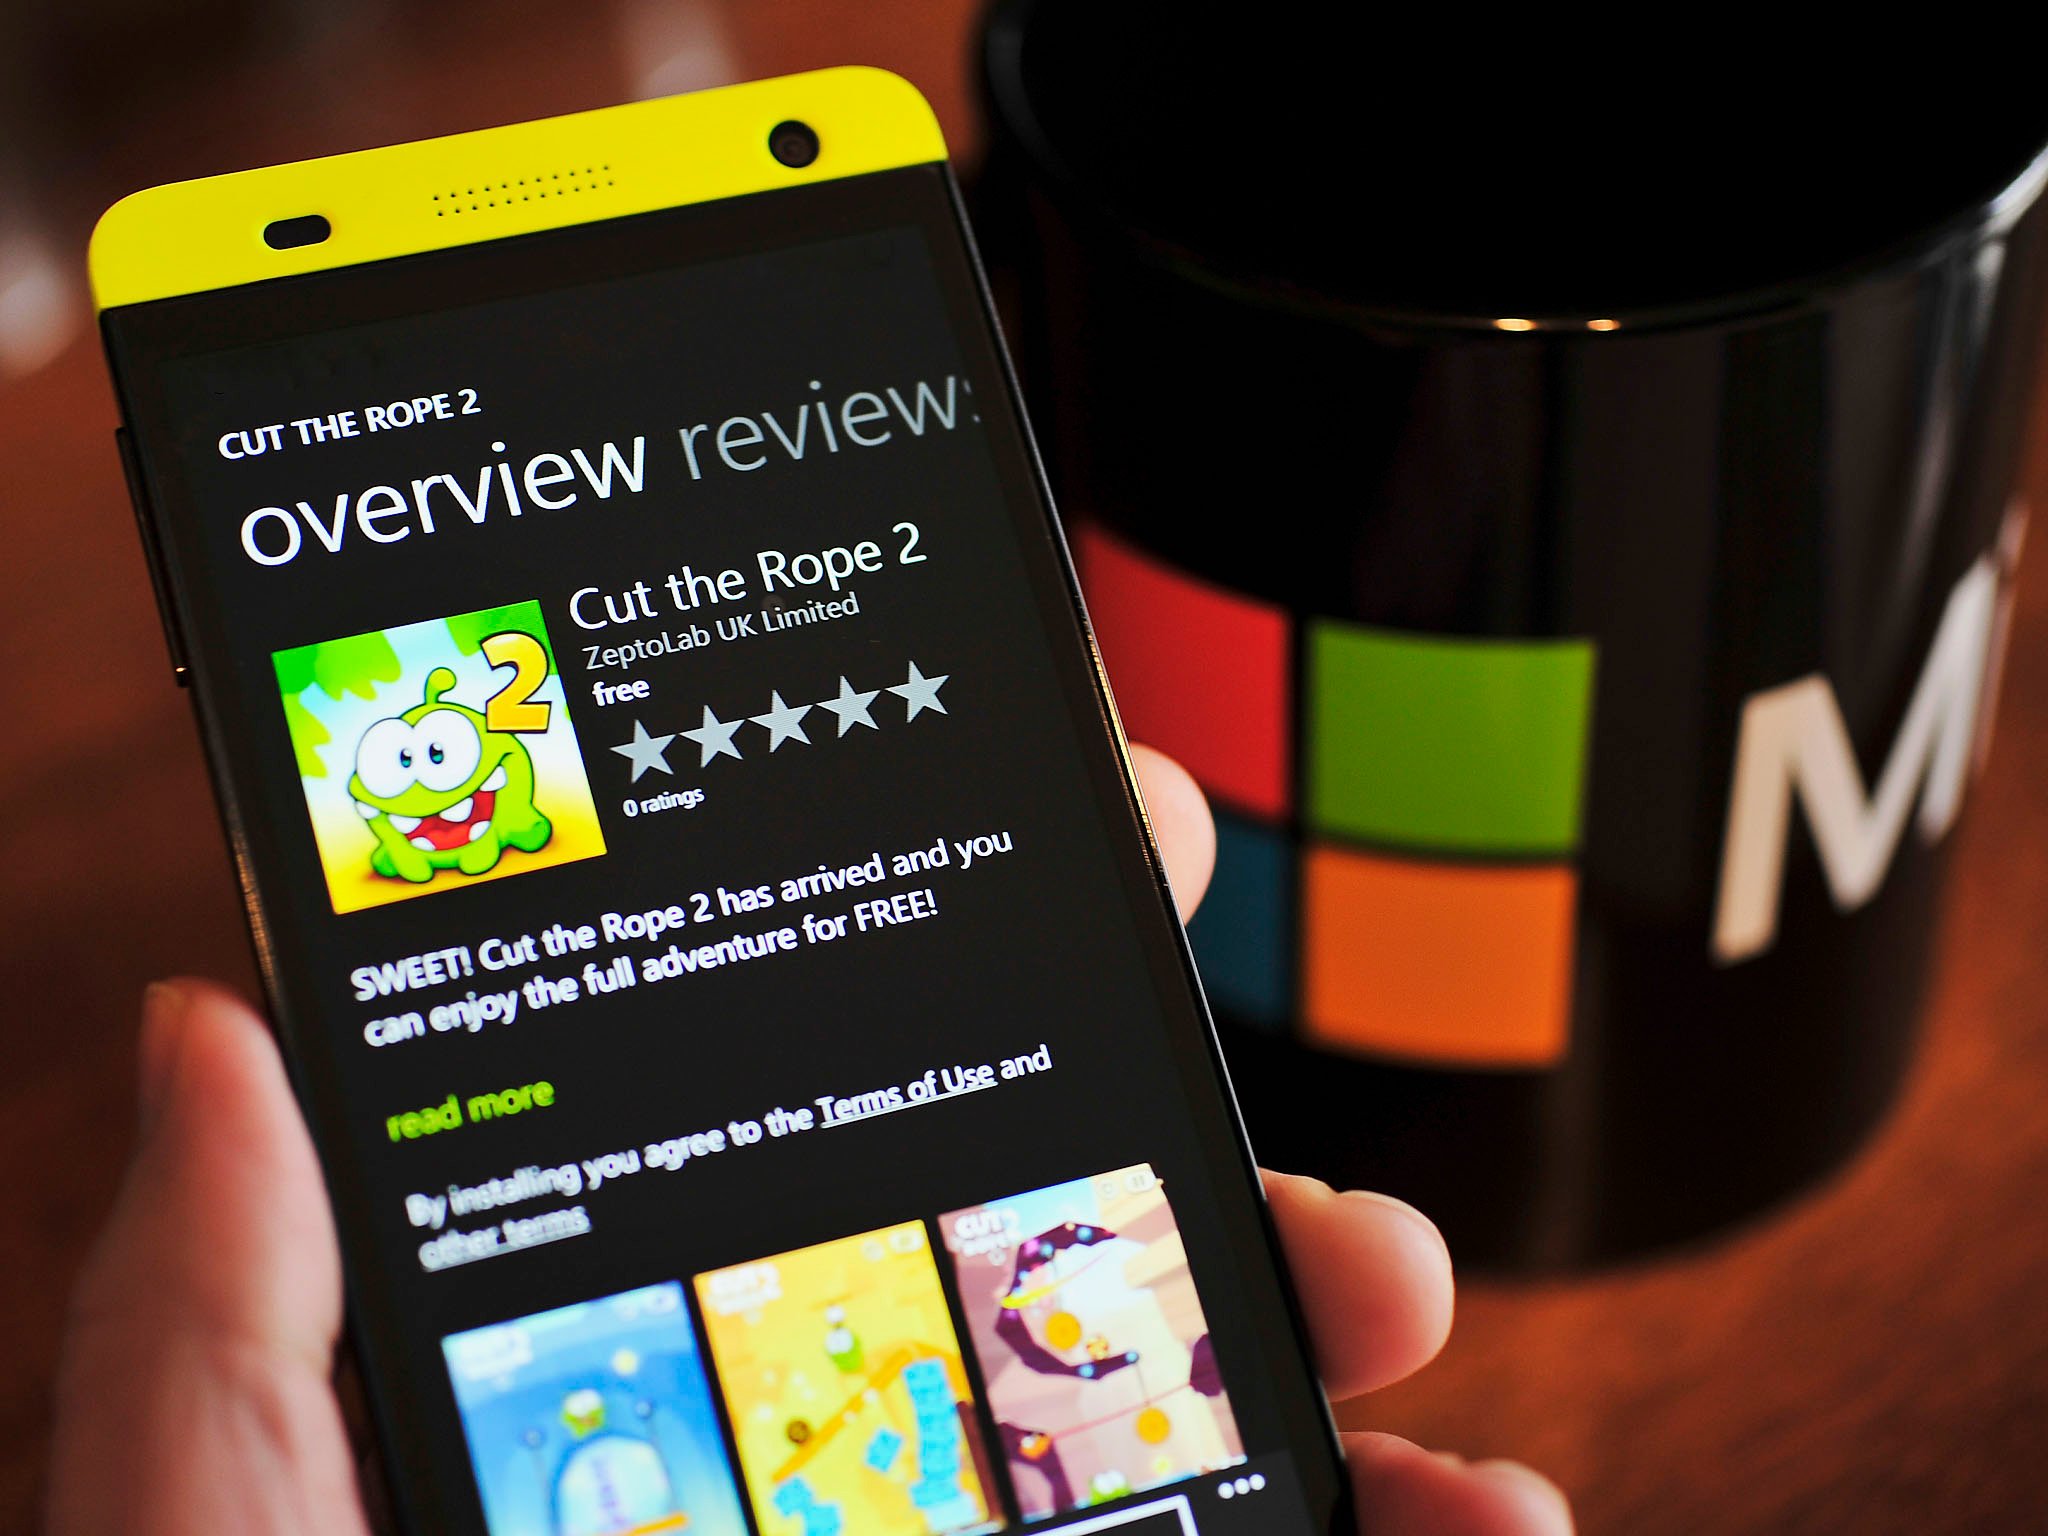 Sweet! Cut the Rope 2 launches for free on Windows Phone